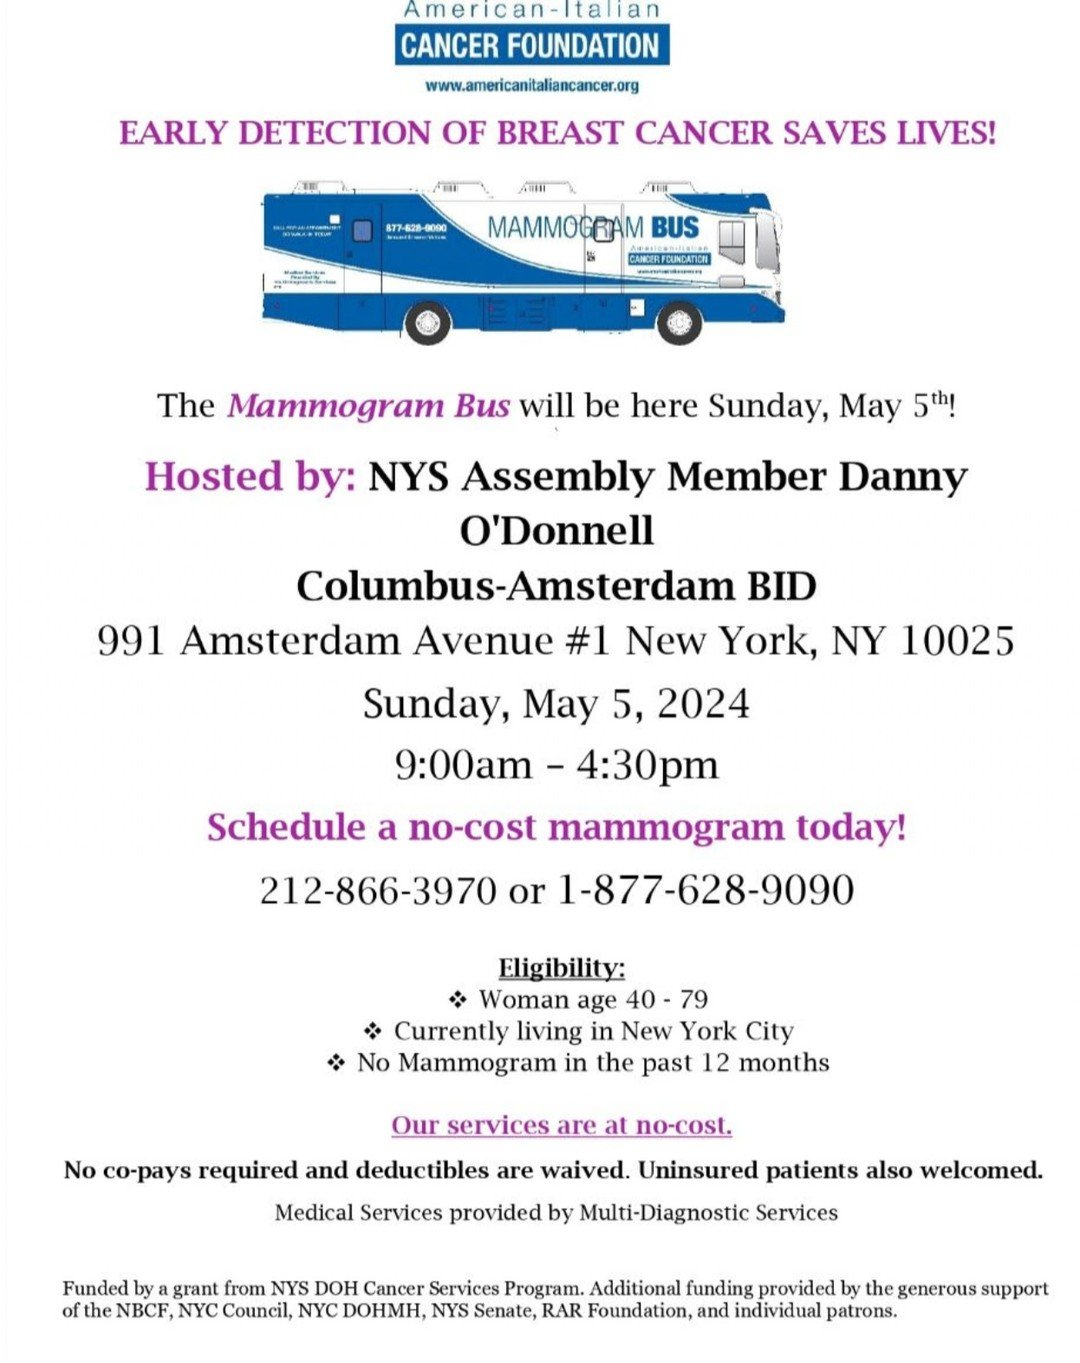 Reminder to sign up for a FREE breast cancer screening through Danny O'Donnell's office THIS SUNDAY, May 5! The mammogram bus will be at our office from 9-4:30 PM during Open Streets. Call 212-866-3970 or 1-877-628-9090 to register. Early detection s